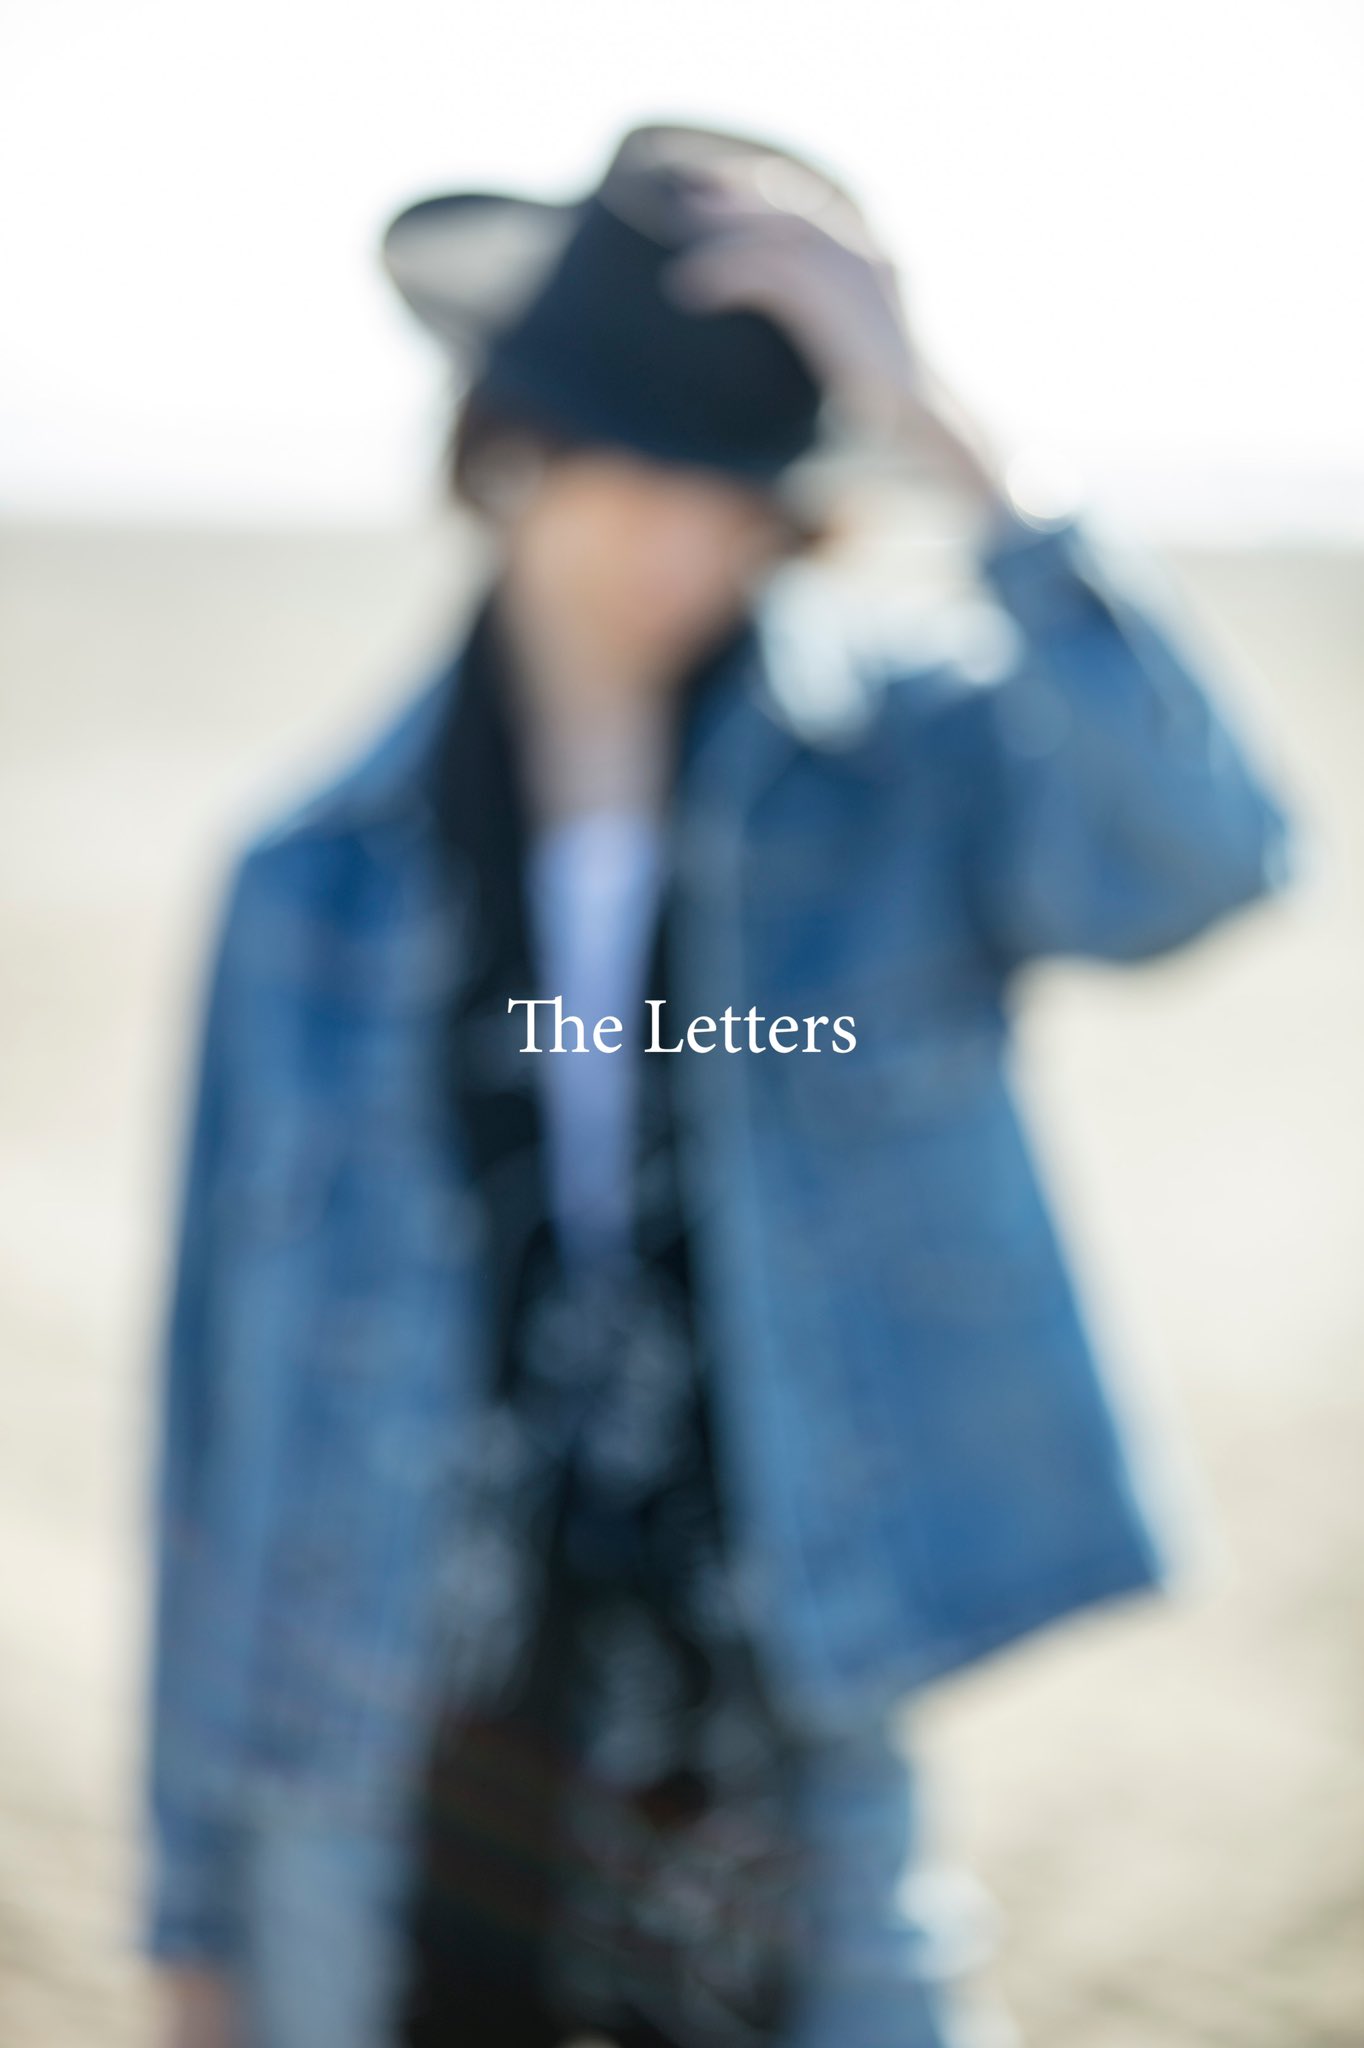 The Letters (@TheLetters_Net) / Twitter